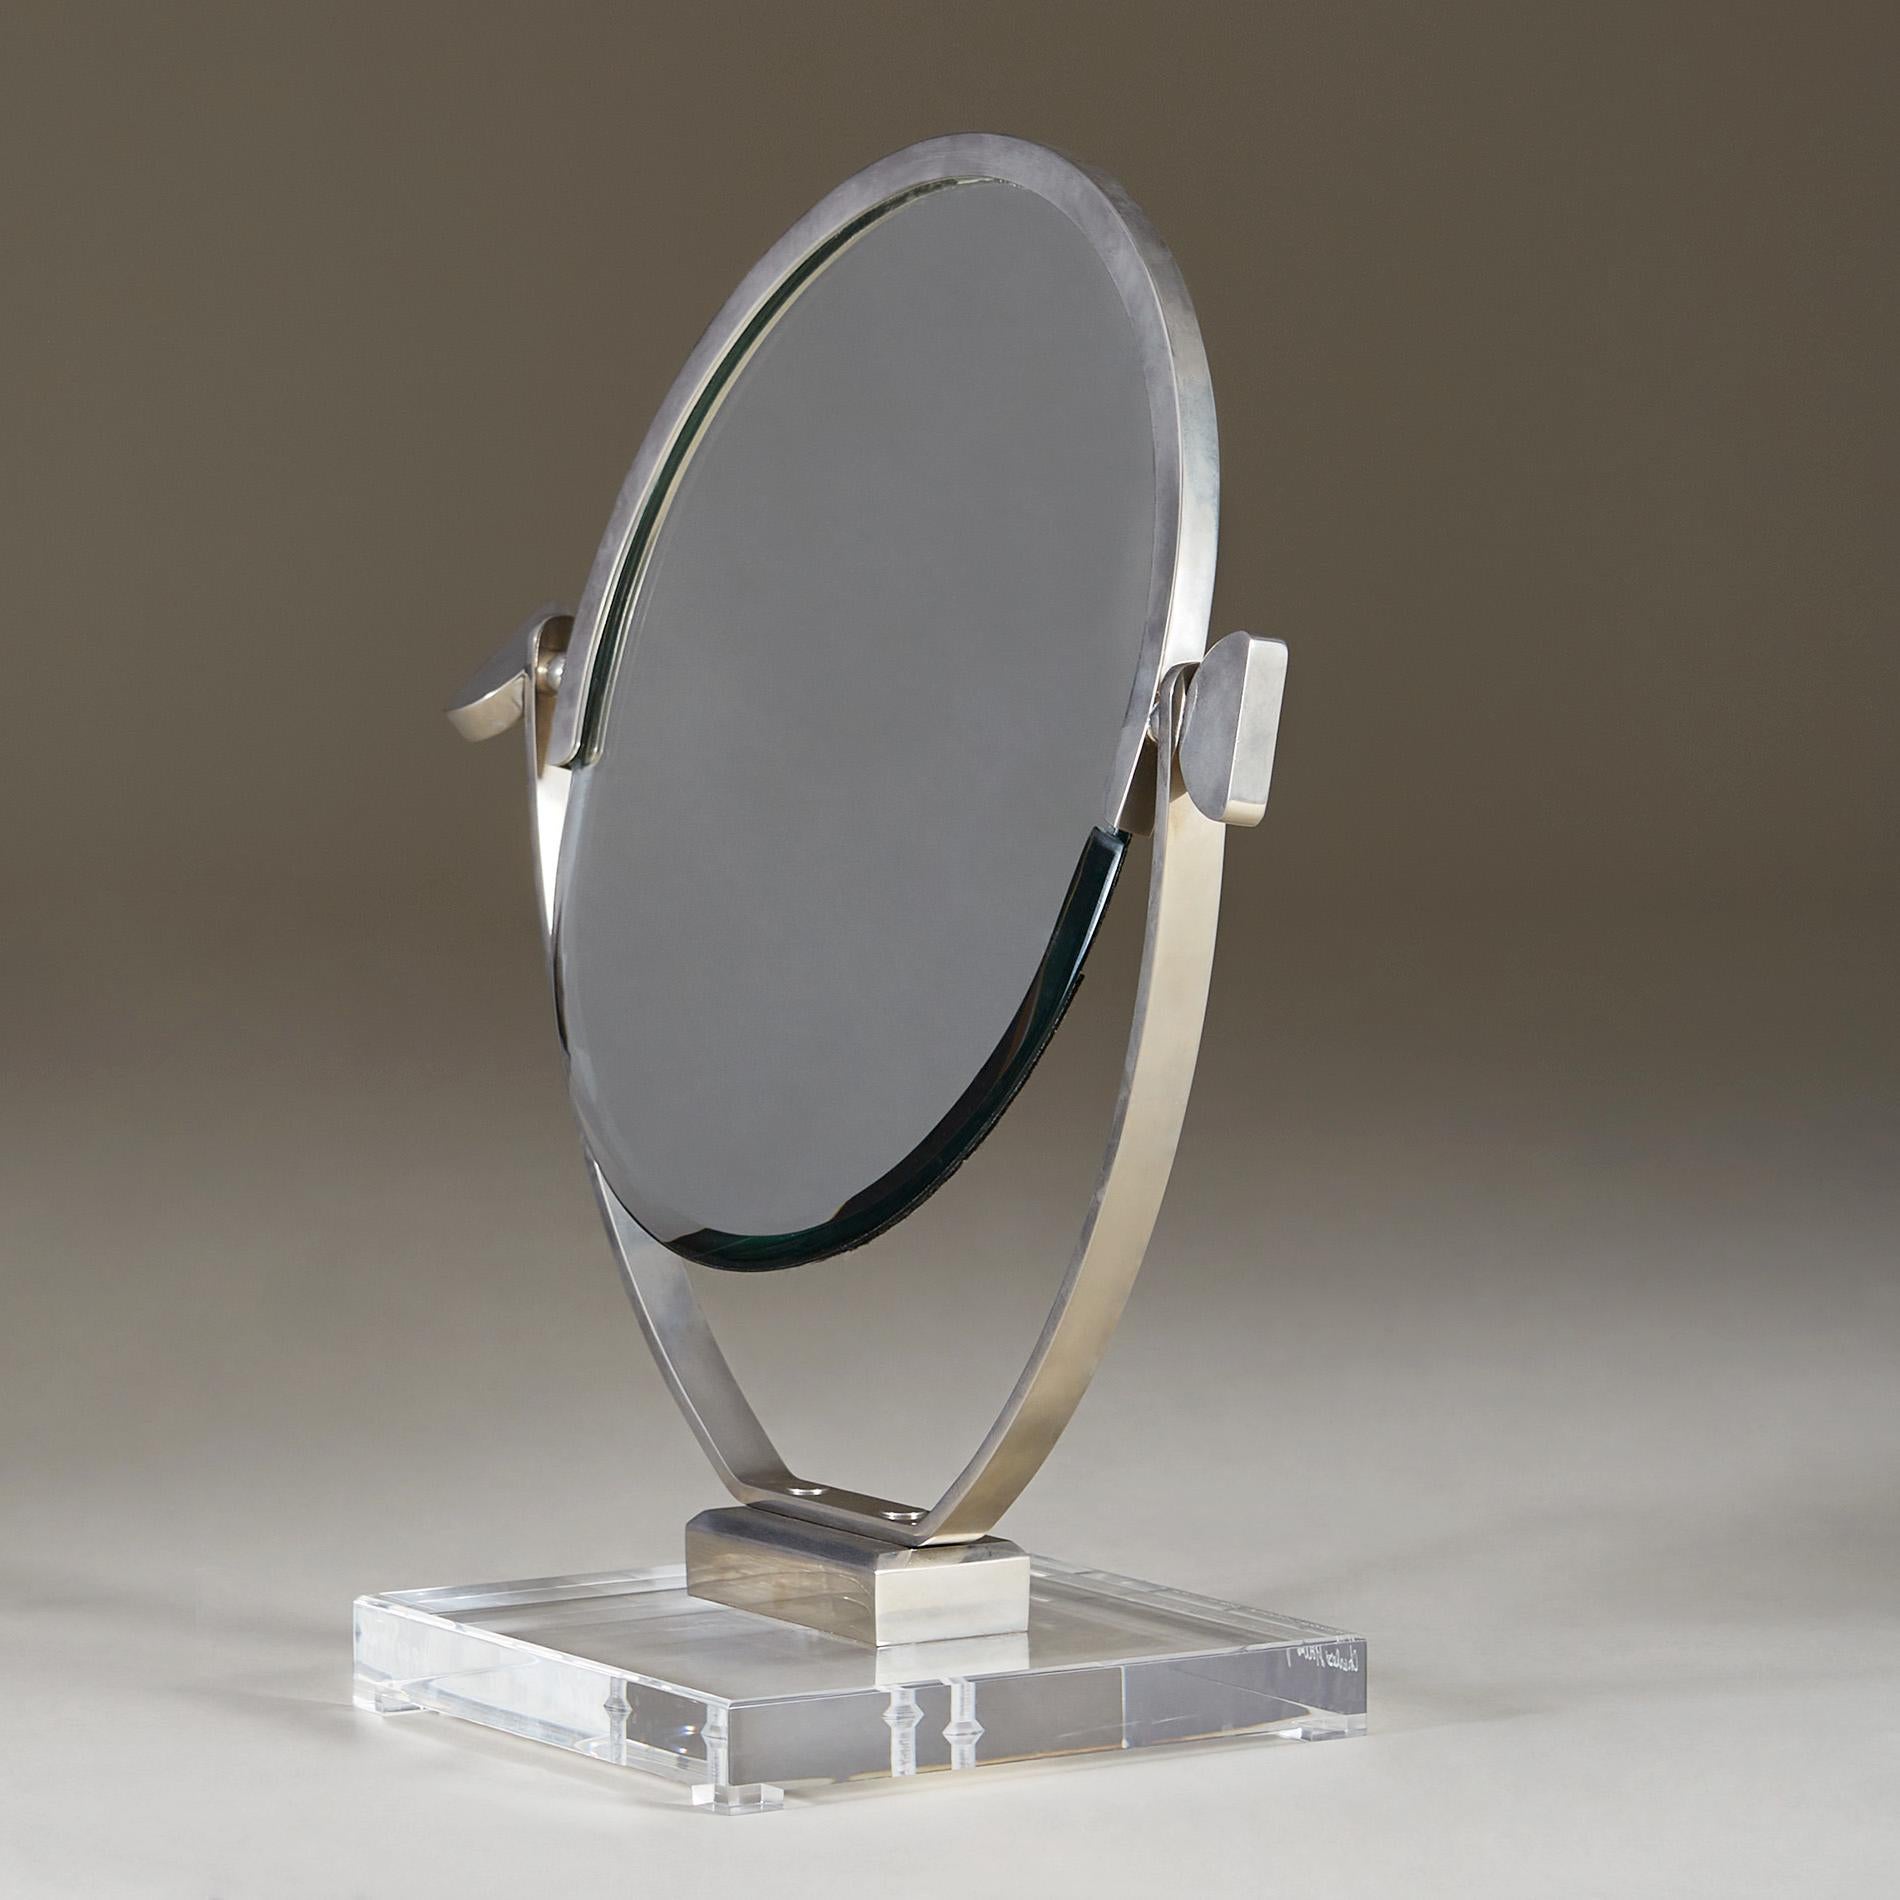 Mid-century modern double-sided bevelled mirror perfectly balanced on a heavy square lucite base. Decorative pebble shaped chrome screw handle on each side allows you to adjust the position of the mirror.

Born in 1945, Charles Hollis Jones is an